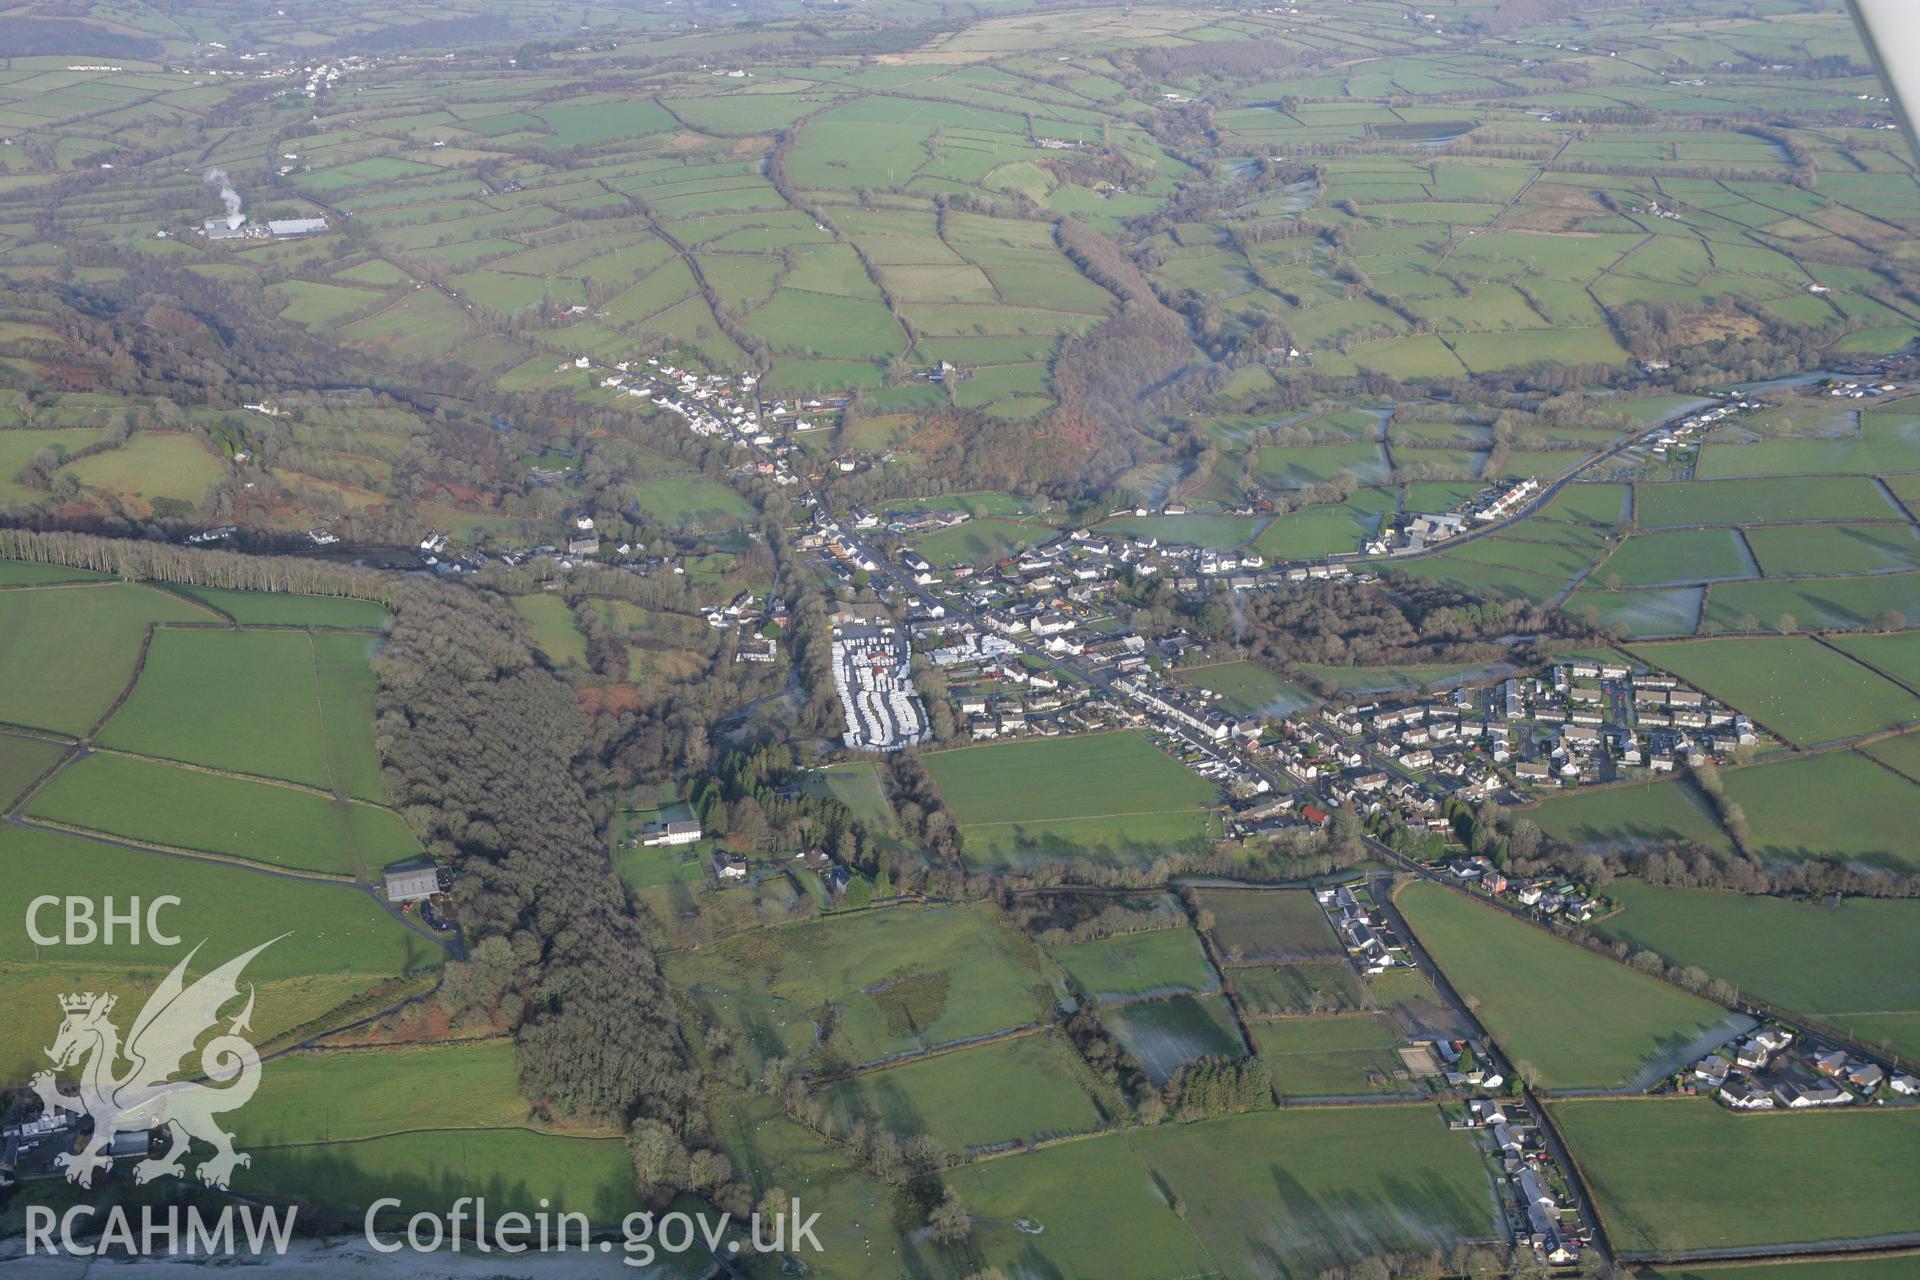 RCAHMW colour oblique photograph of Pencader village. Taken by Toby Driver on 15/12/2008.